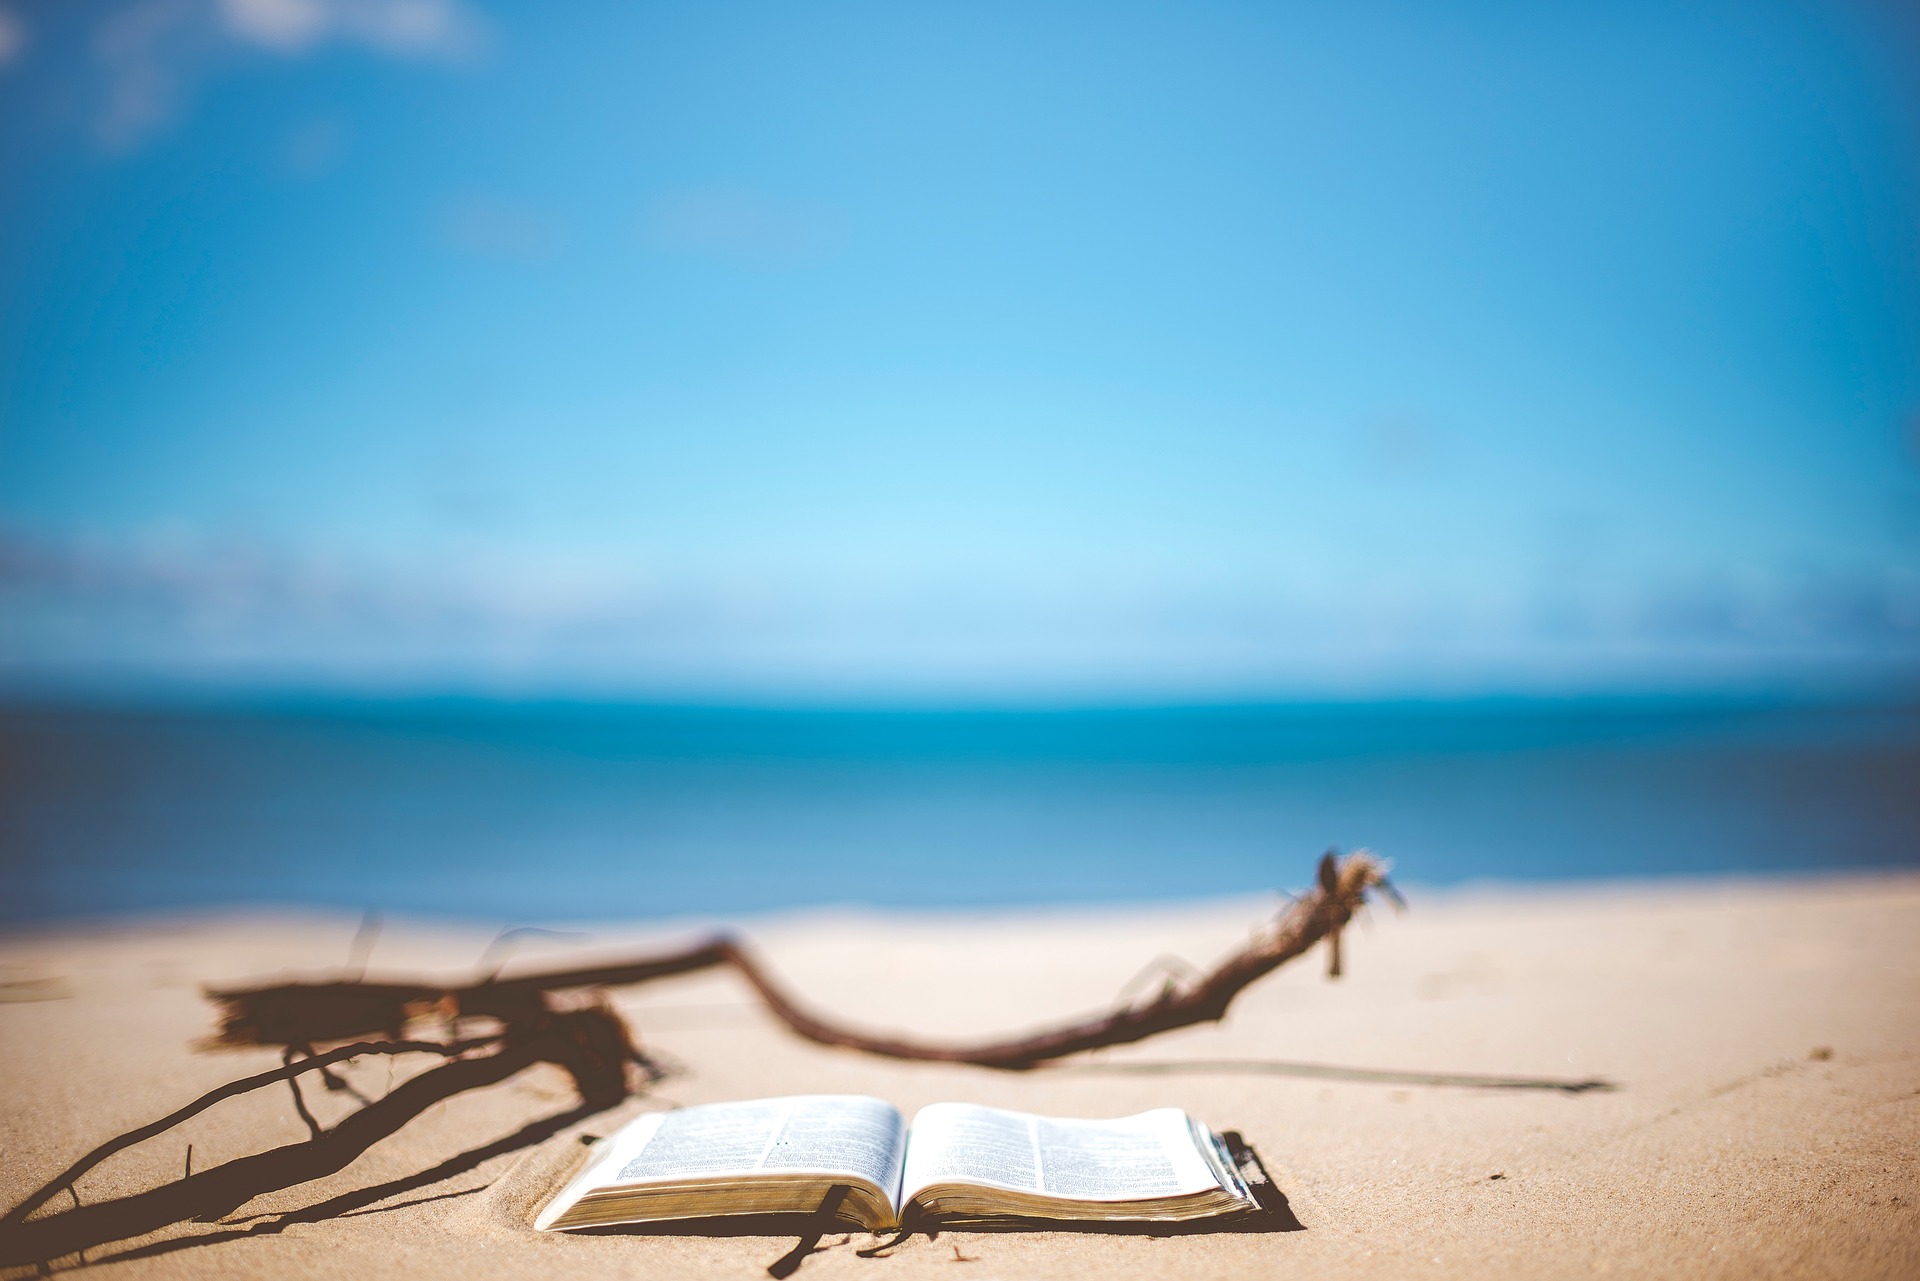 Find the perfect book to read on the beach